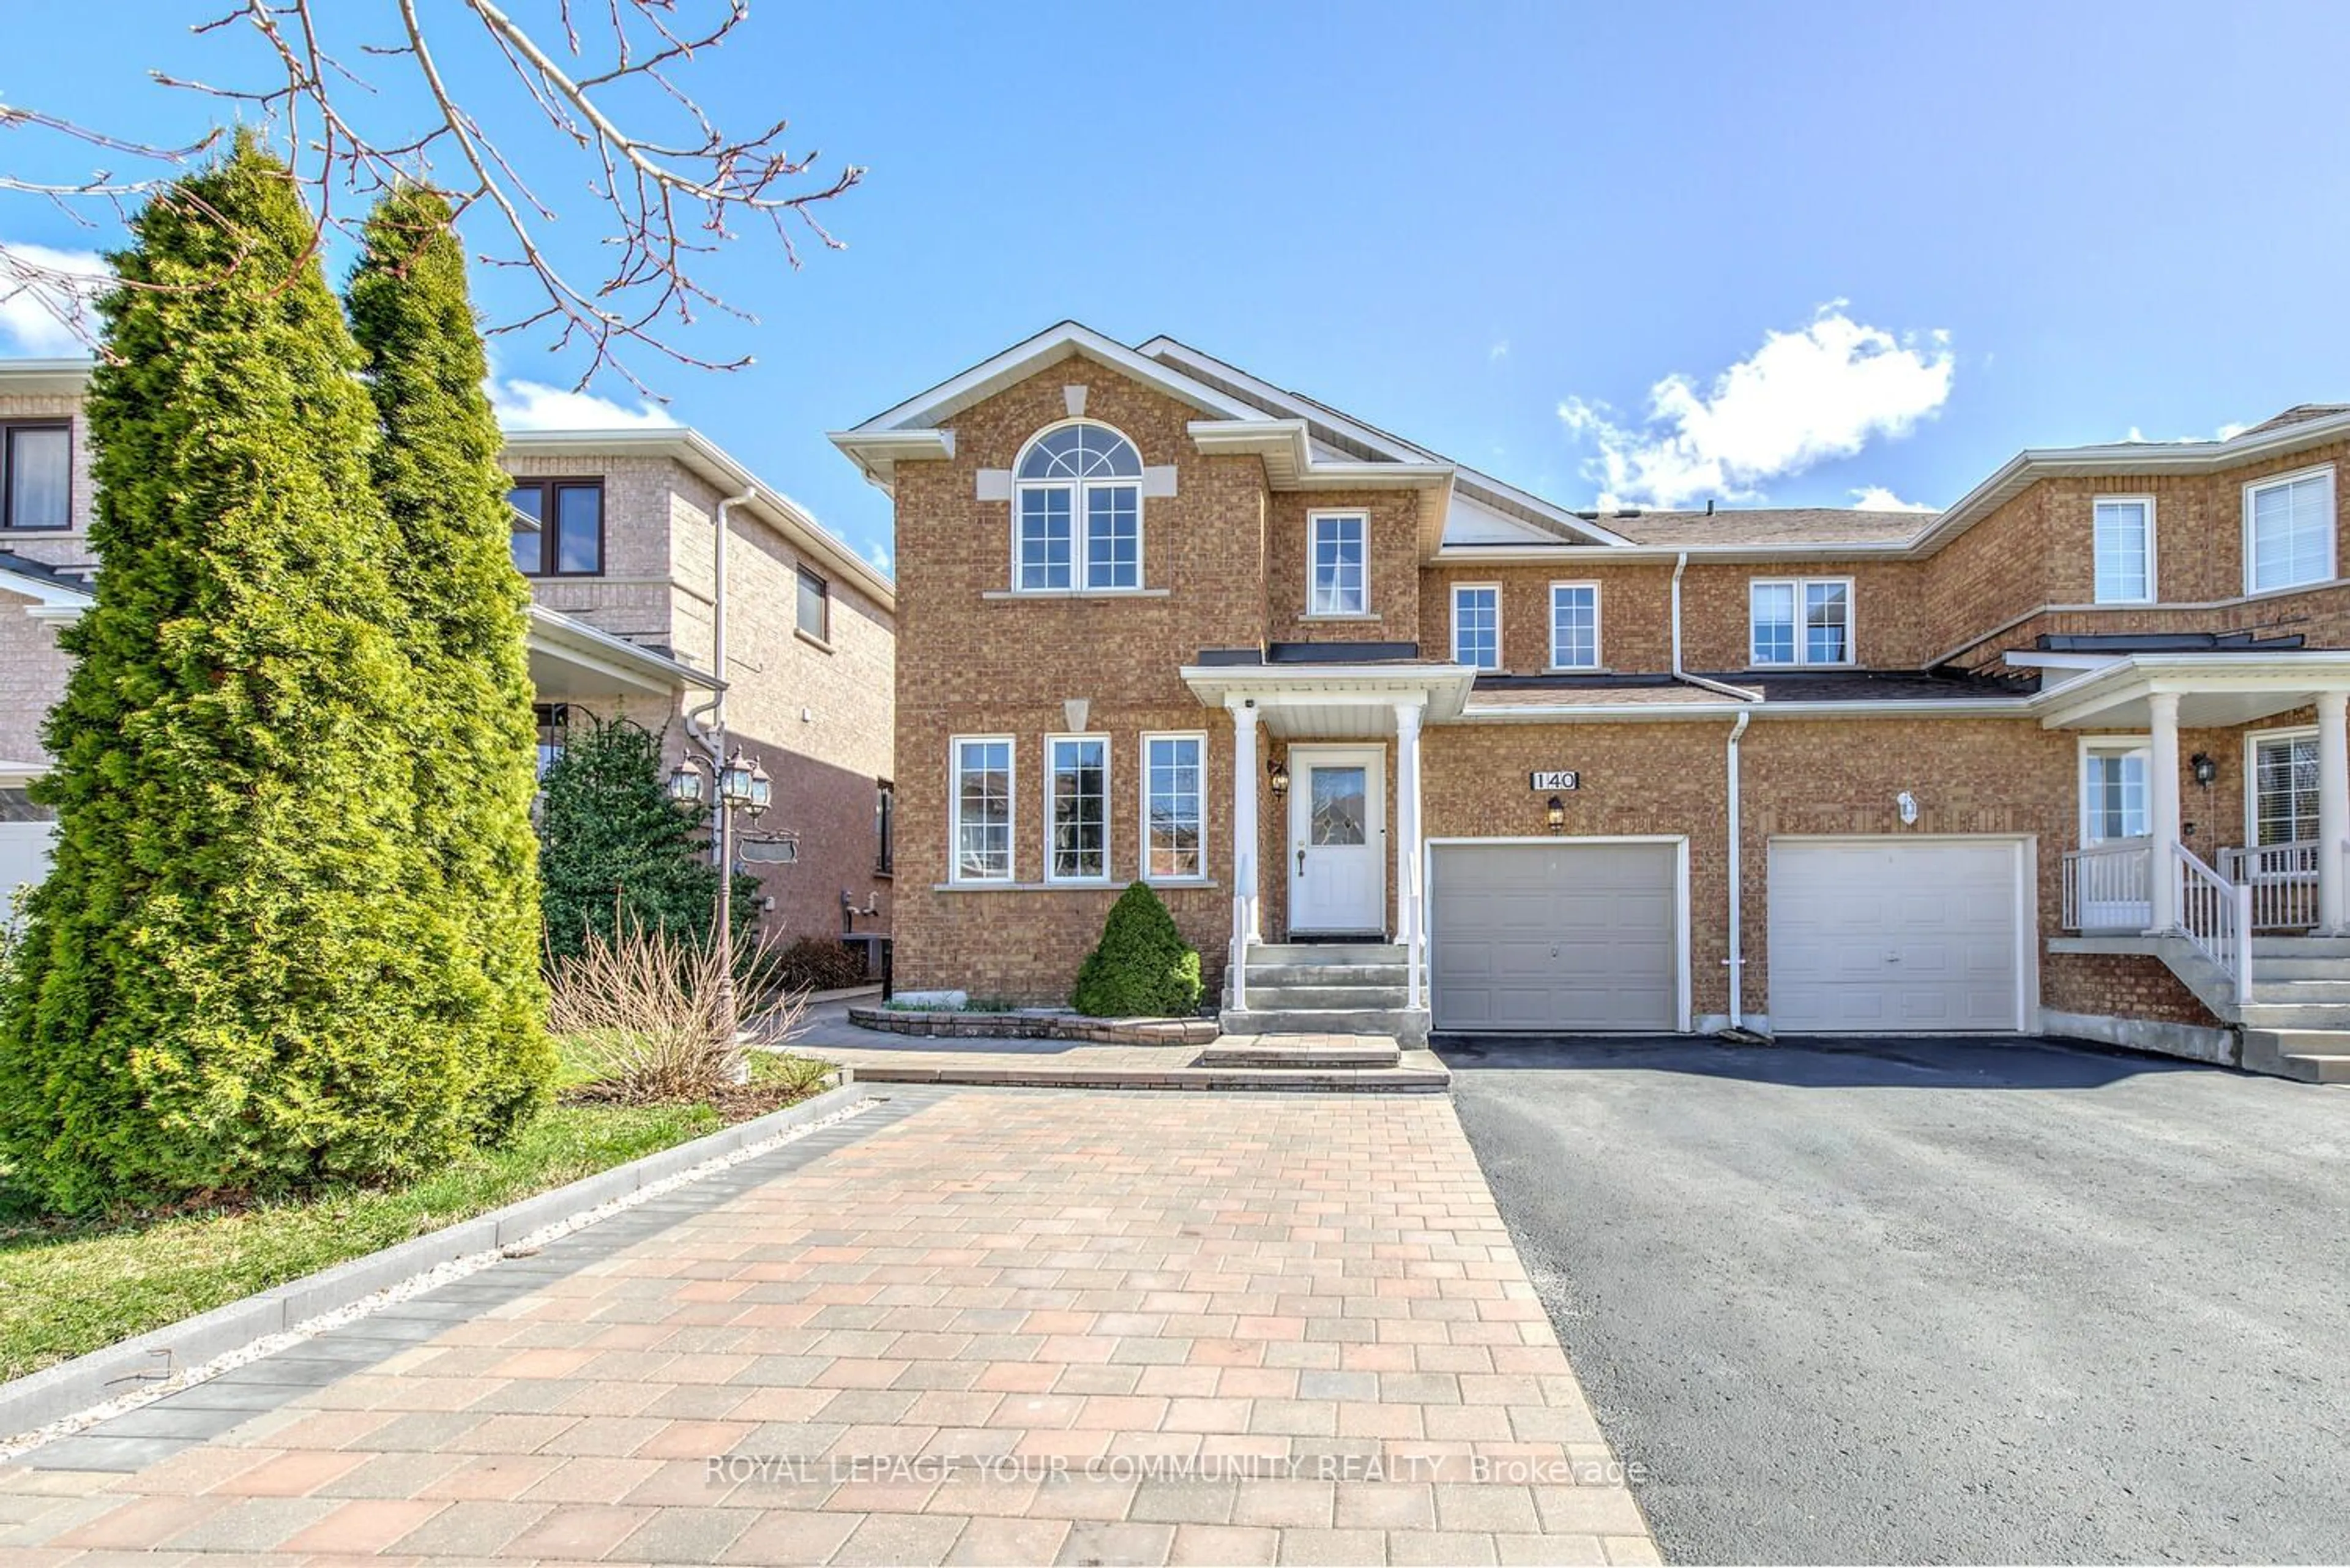 Home with brick exterior material for 140 Blackthorn Dr, Vaughan Ontario L6A 3N2